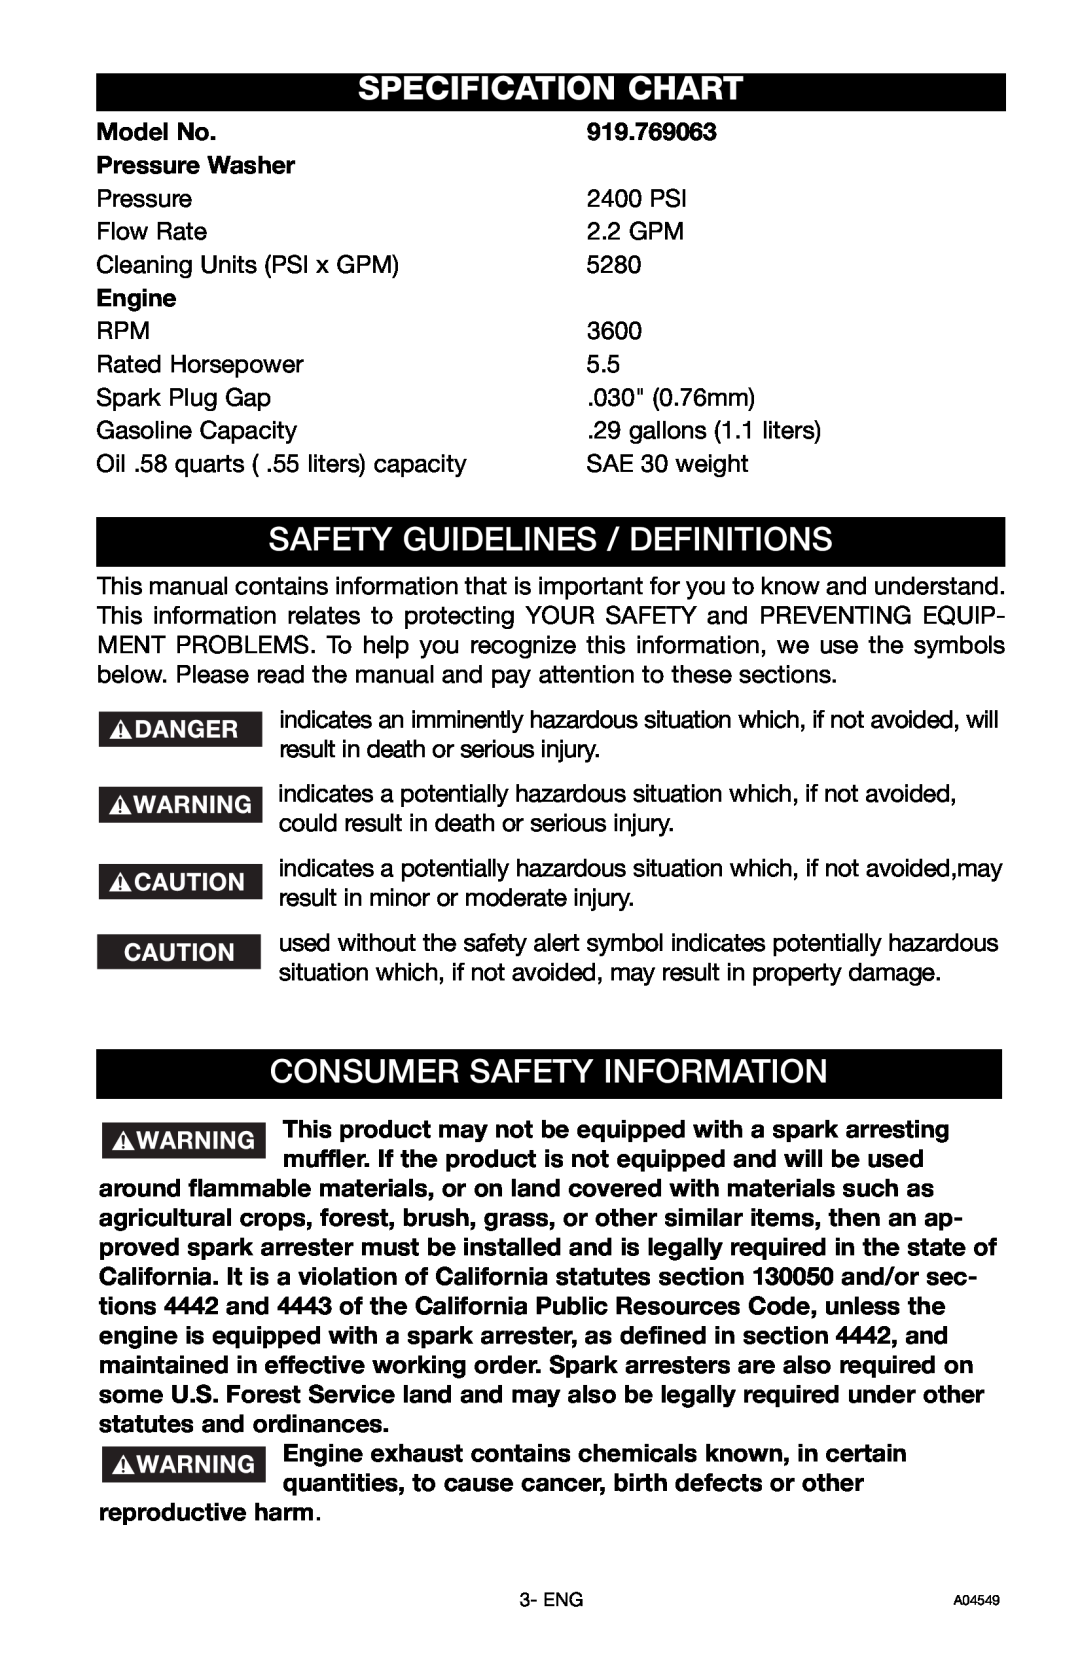 Craftsman 919.769063 owner manual Specification Chart, Safety Guidelines / Definitions, Consumer Safety Information 